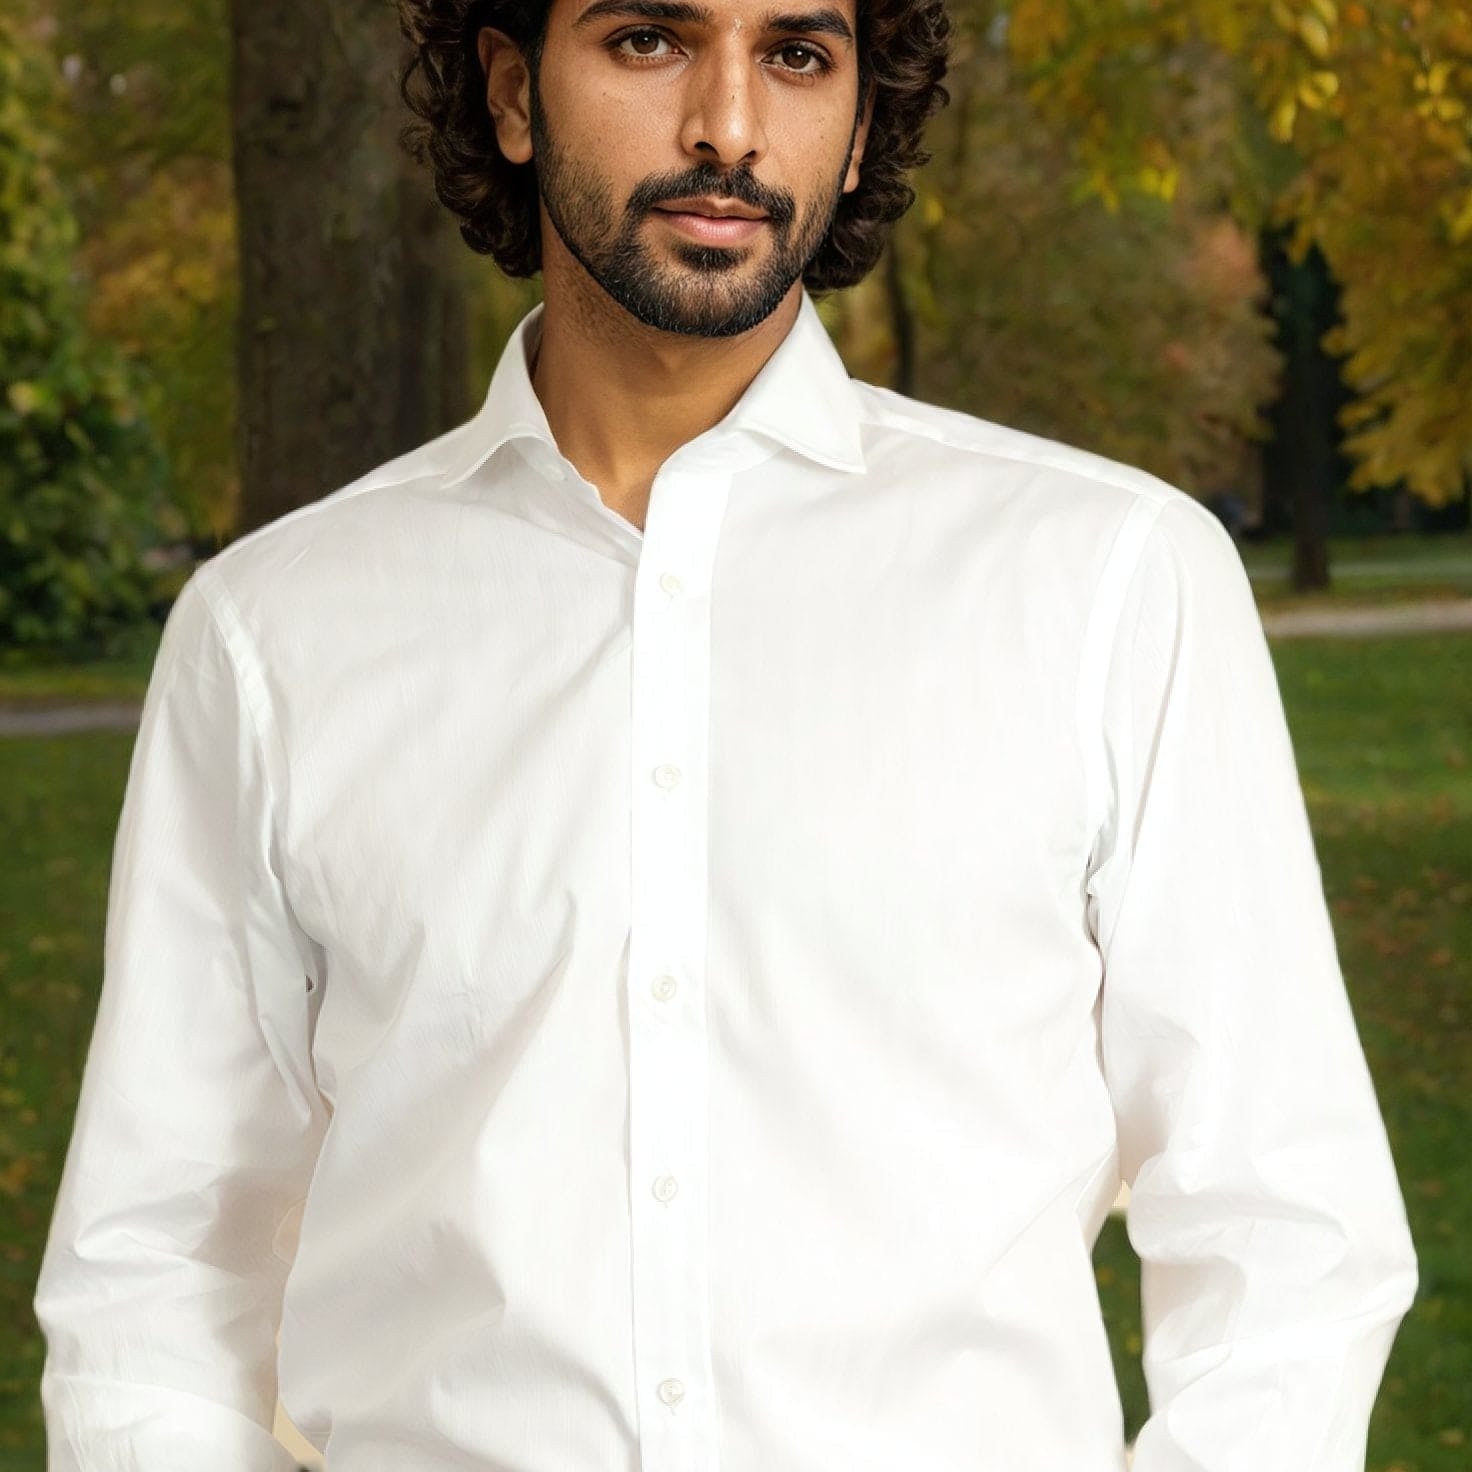 Classic Fit, Cut-away Collar, Double Cuff Shirt in a Multi Satin Stripe White-On-White Cotton